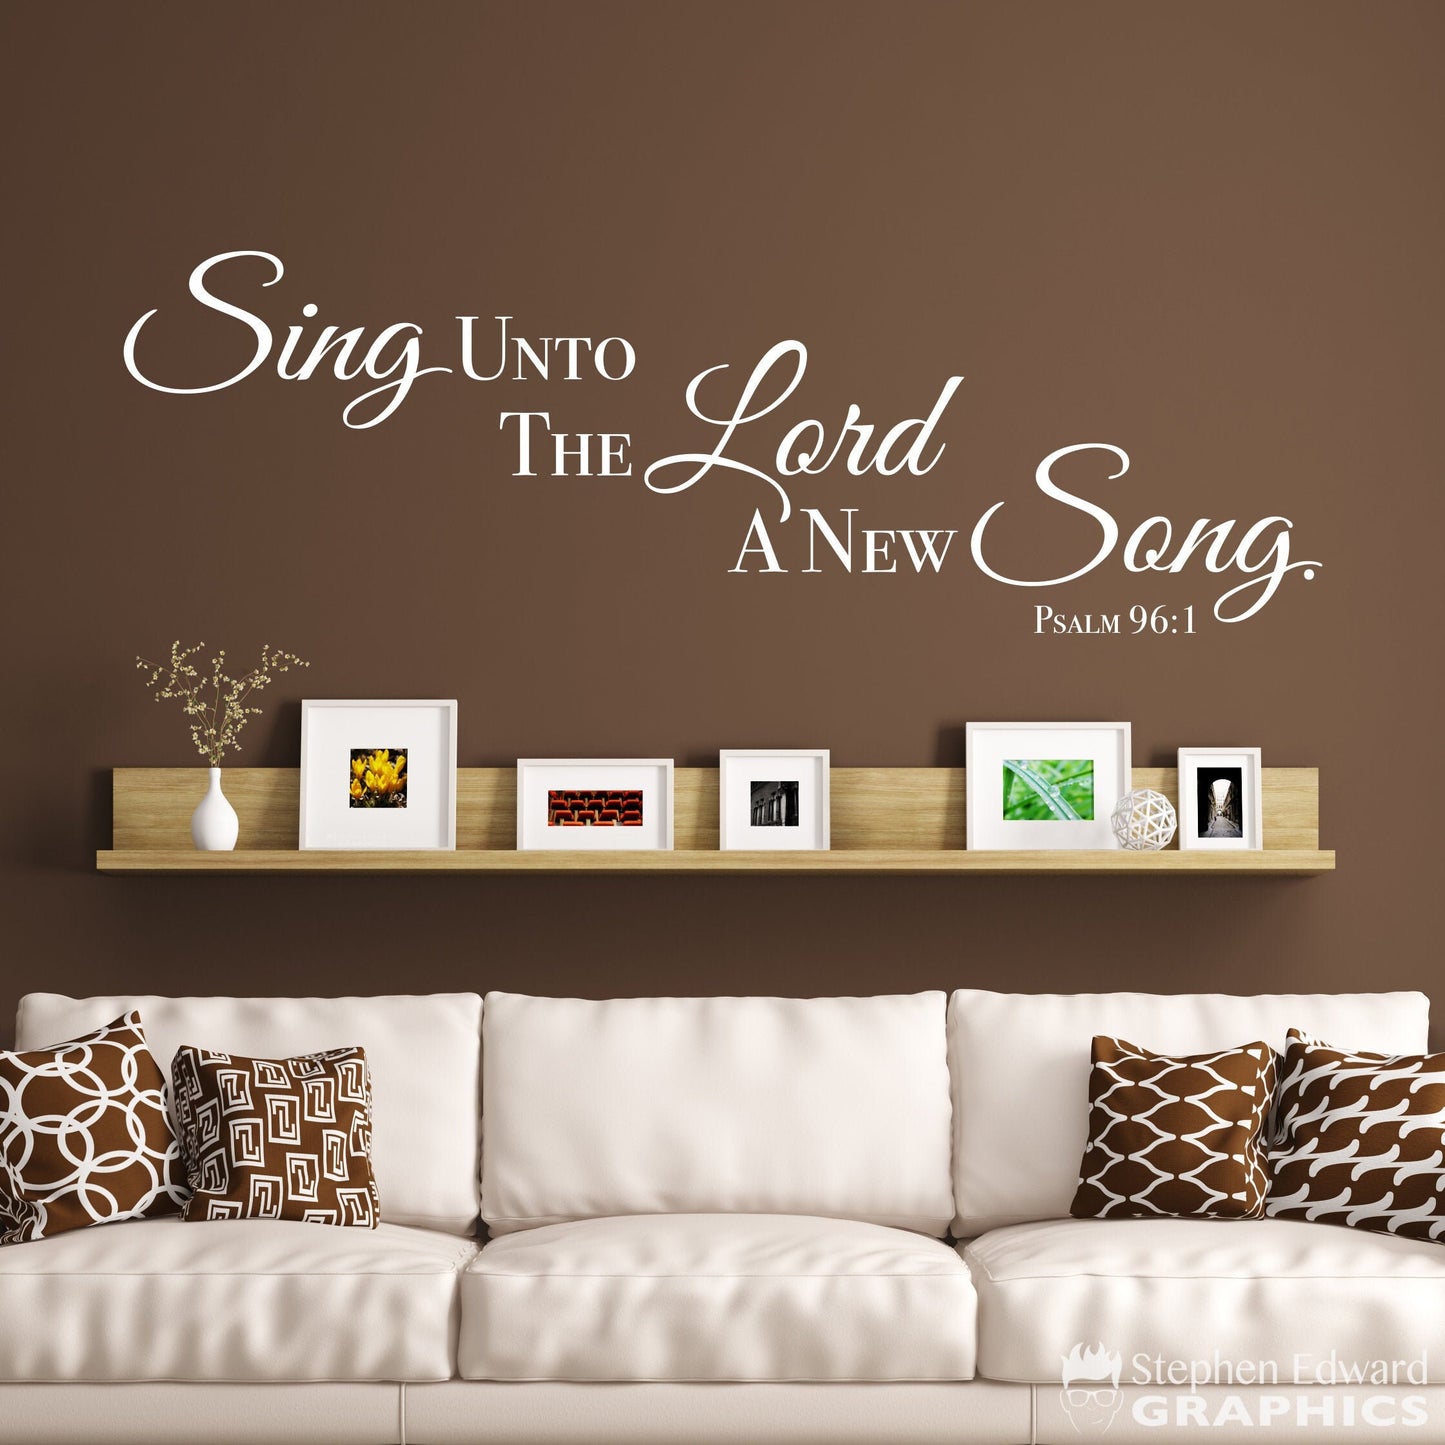 Sing unto the Lord a new Song Decal - Christian Decor - Bible Verse Wall Art